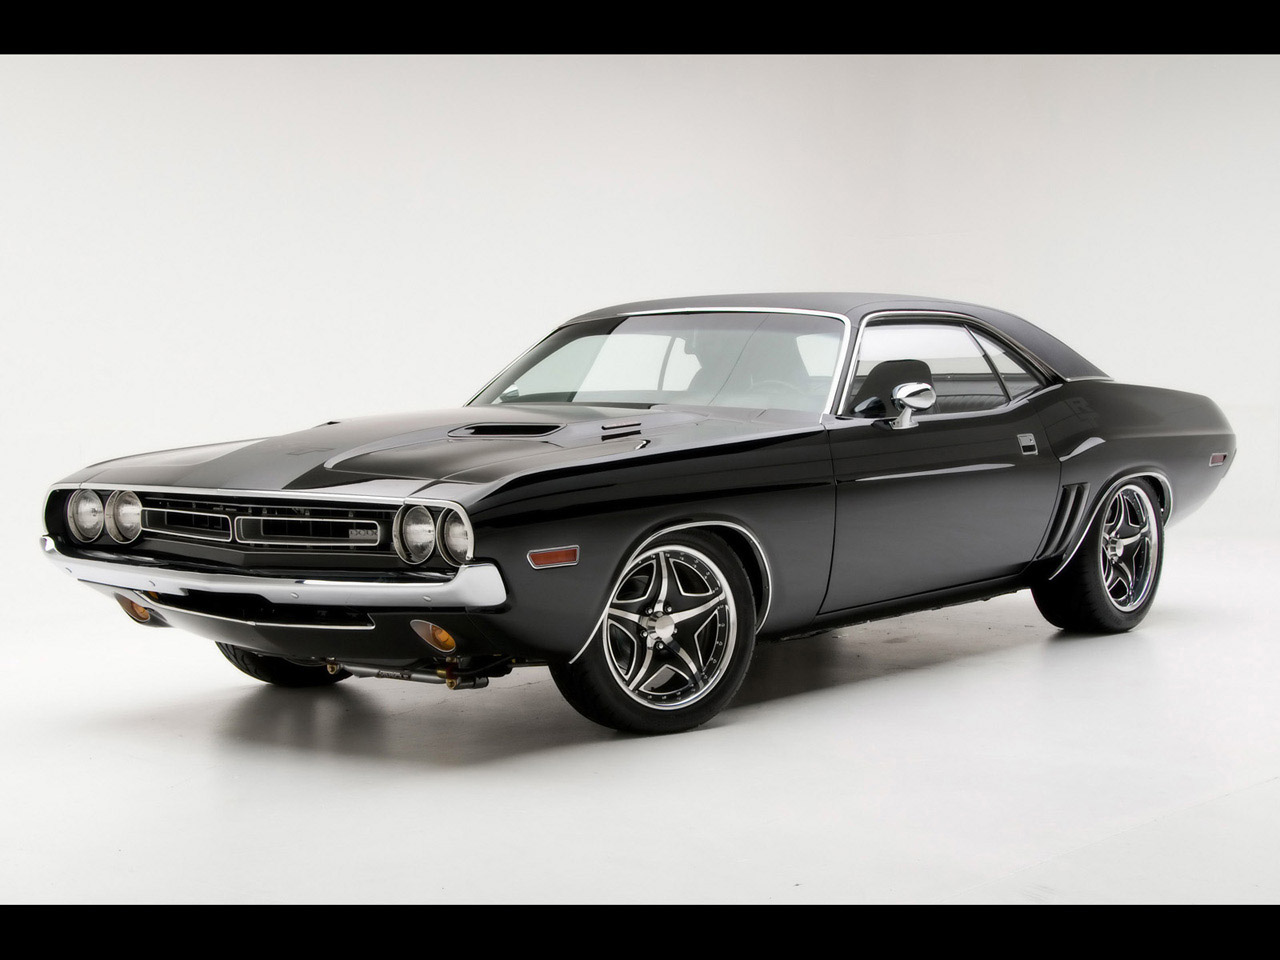 Cool Muscle Car Wallpaper Pictures Of Cars HD